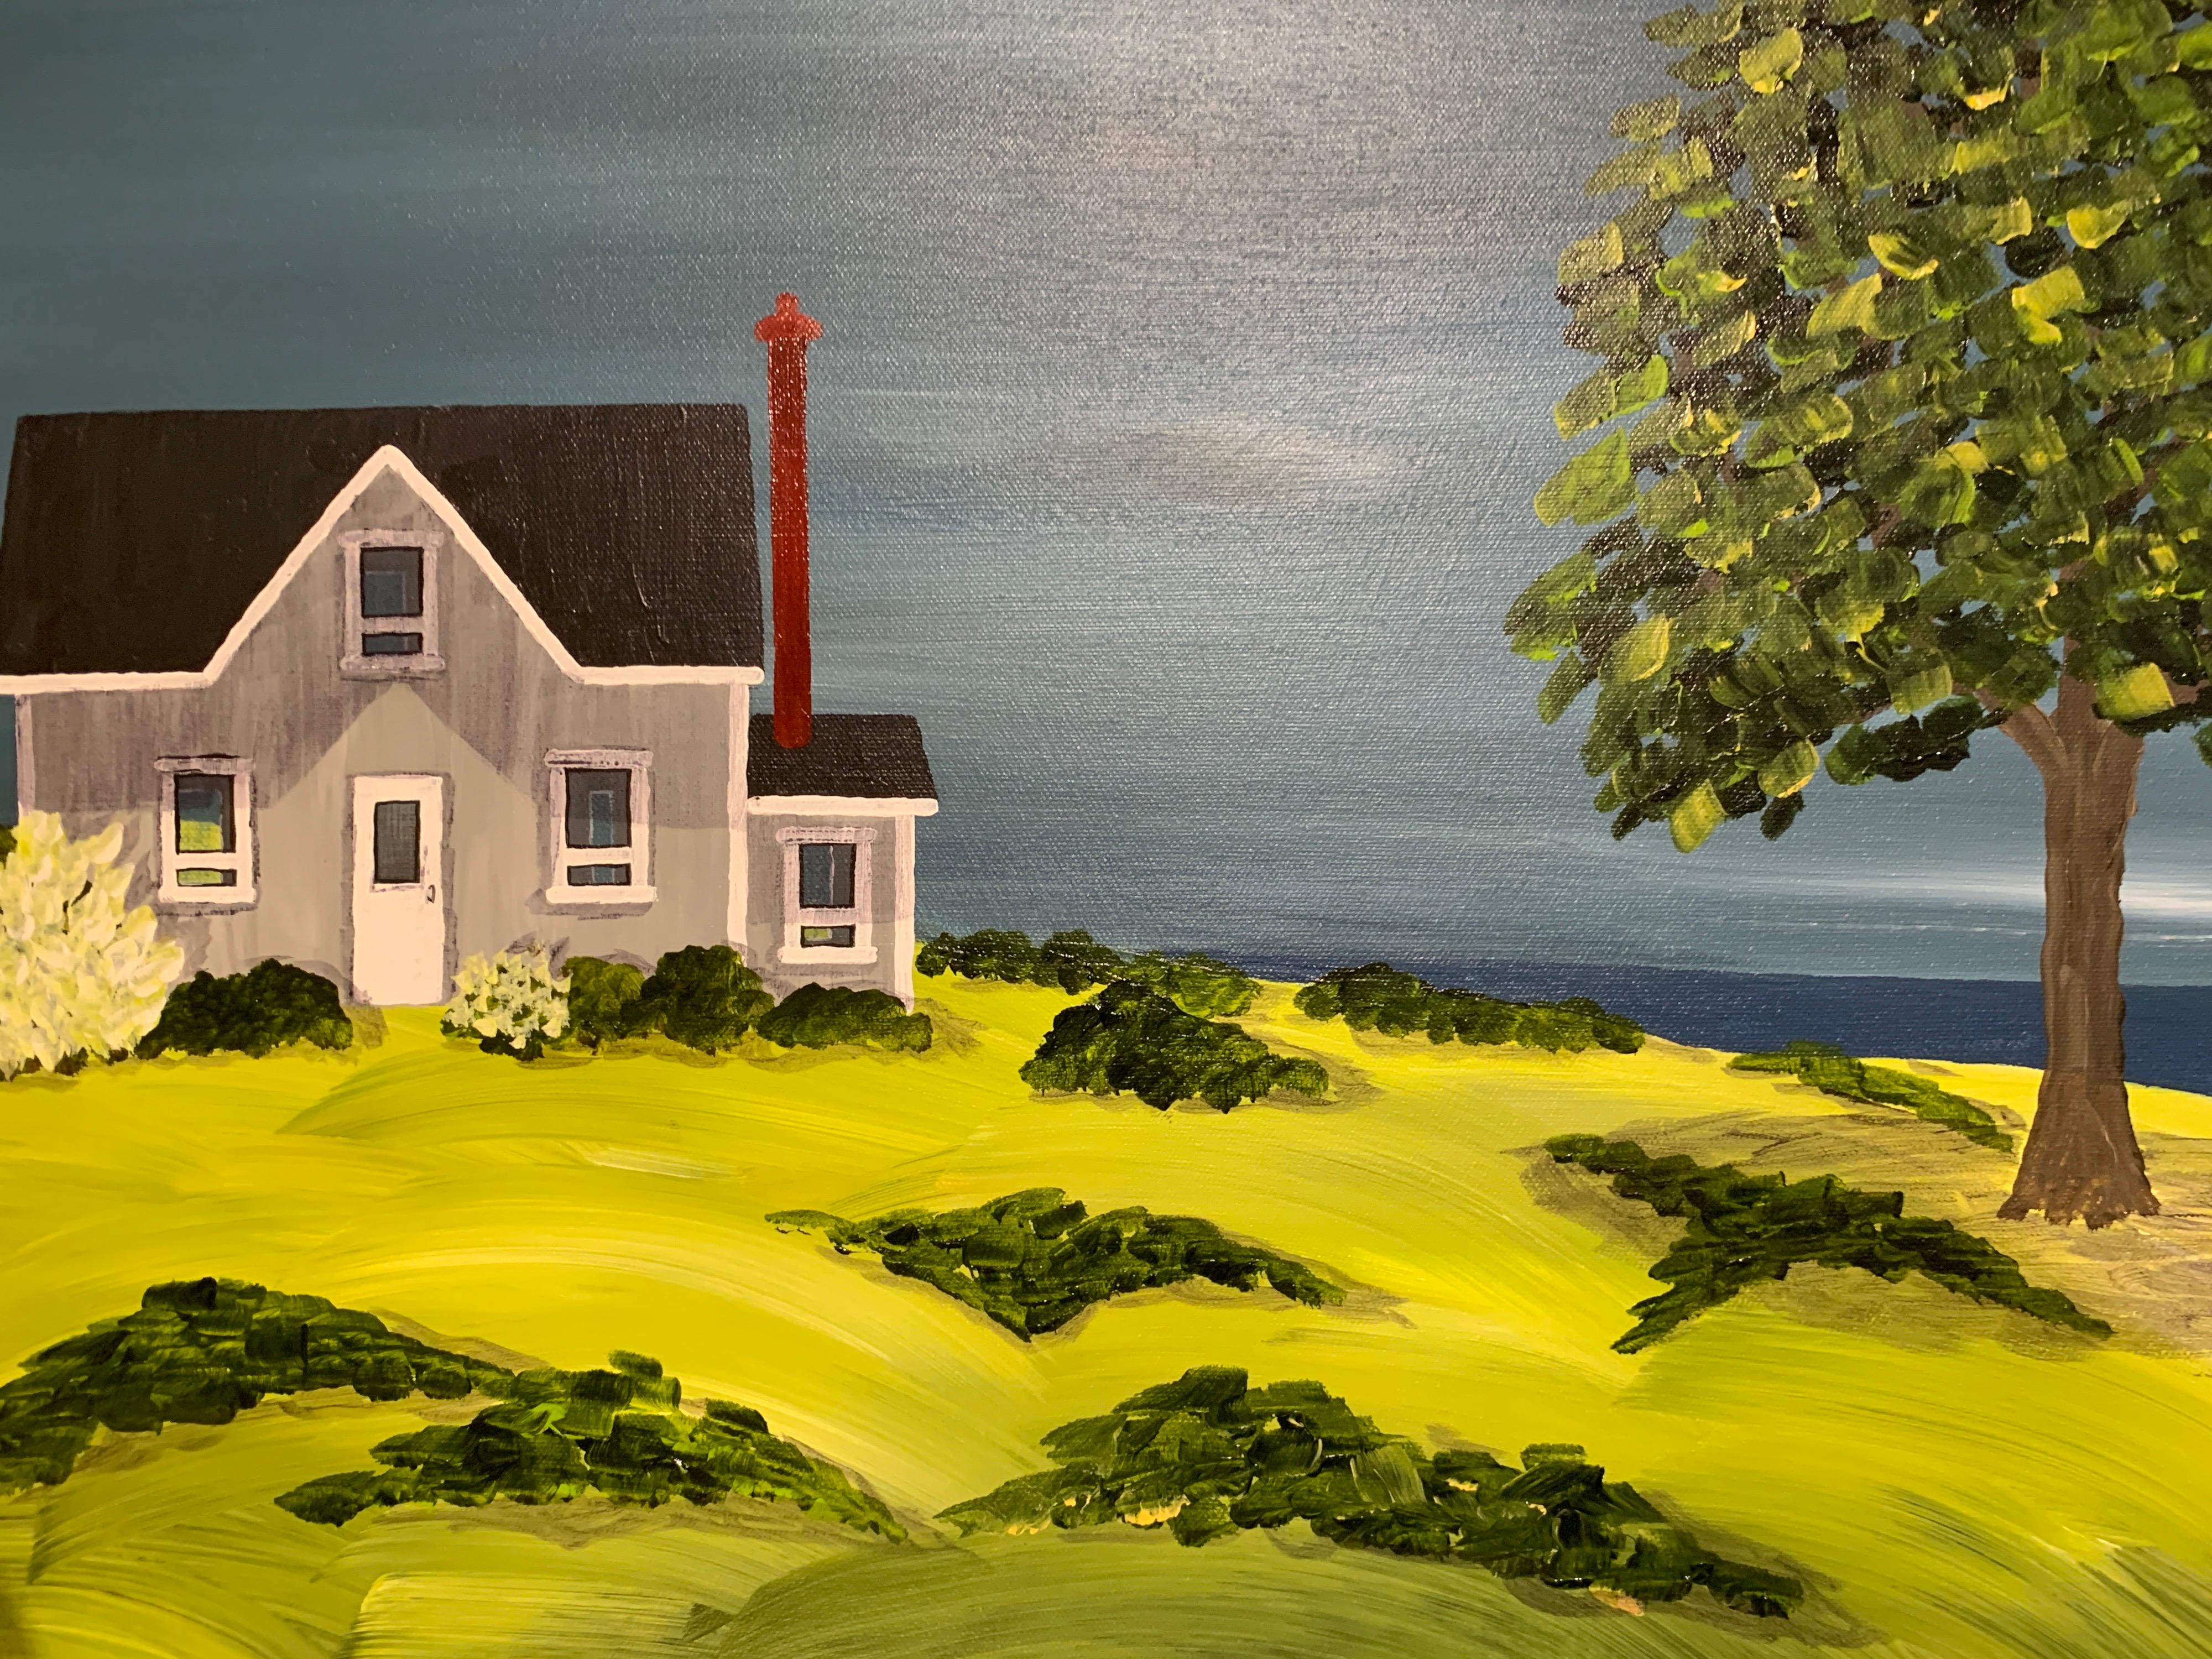 The Olde Cottage by Susan Kinsella, Landscape Acrylic on Canvas Painting 2